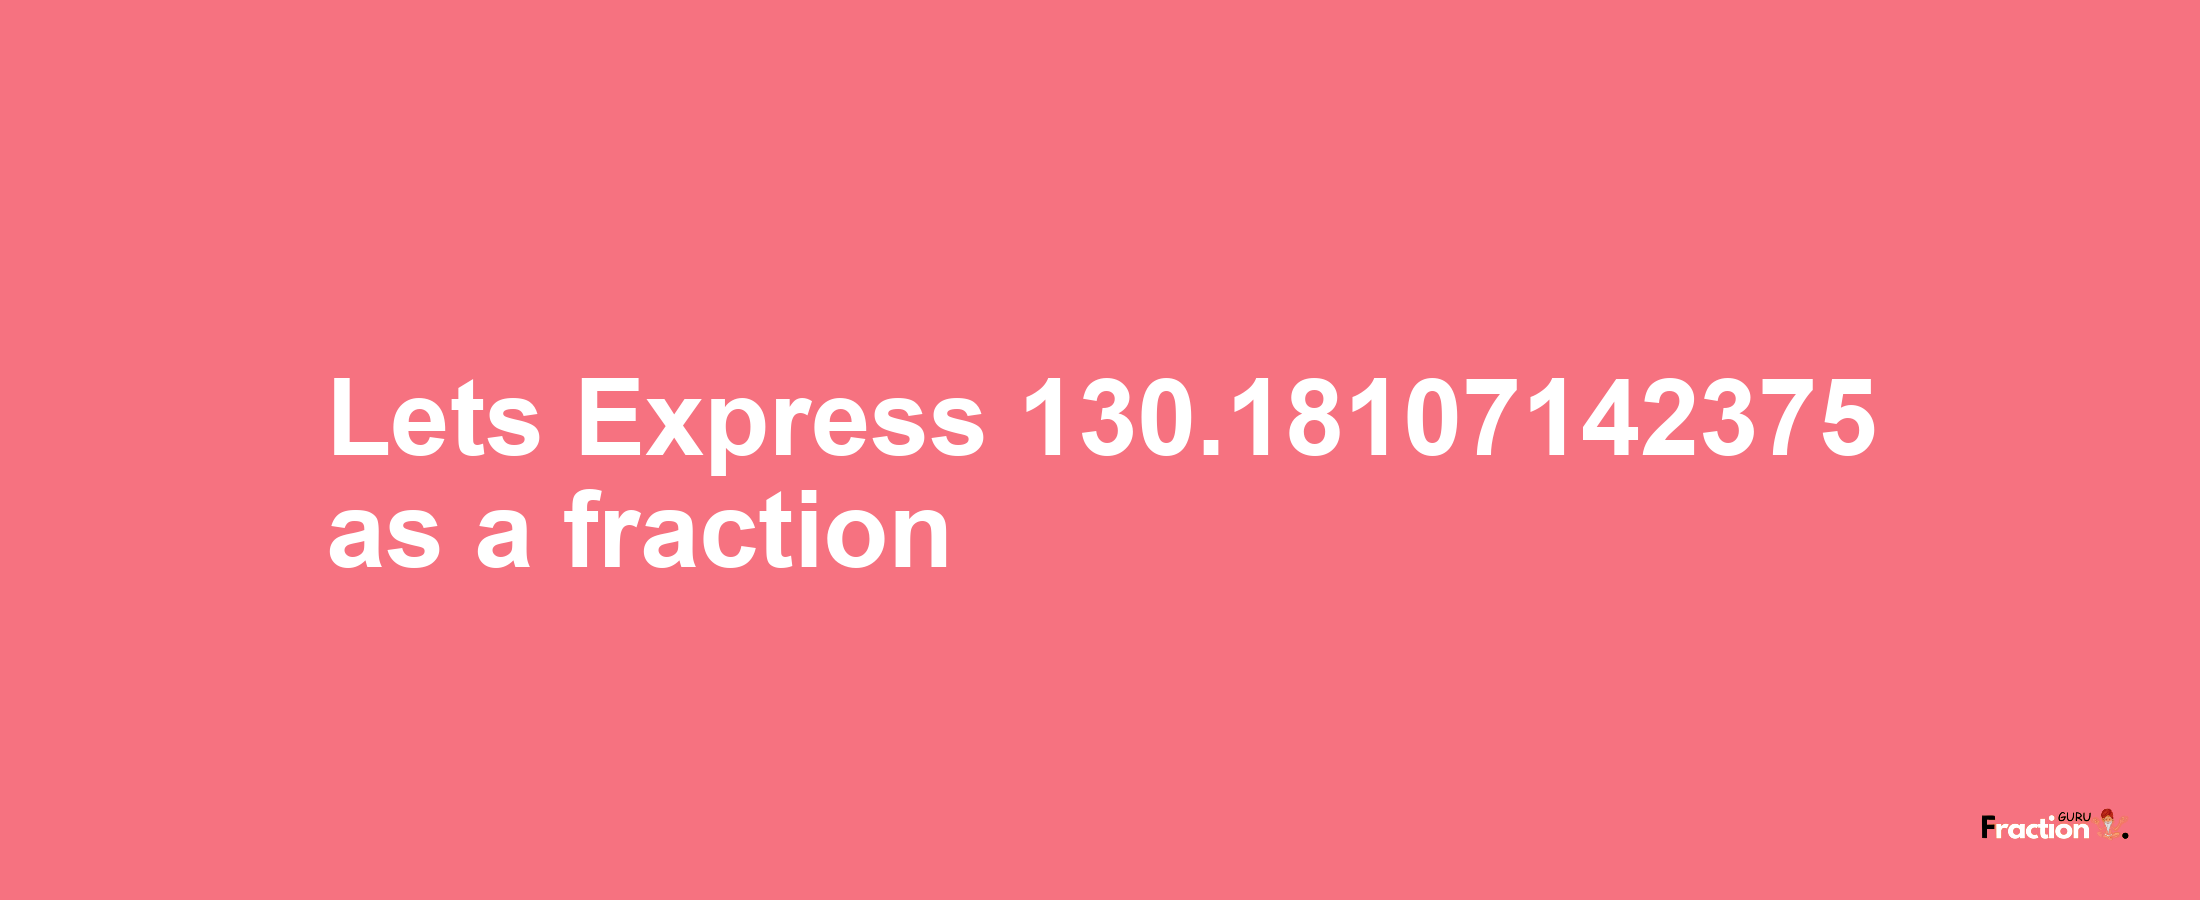 Lets Express 130.18107142375 as afraction